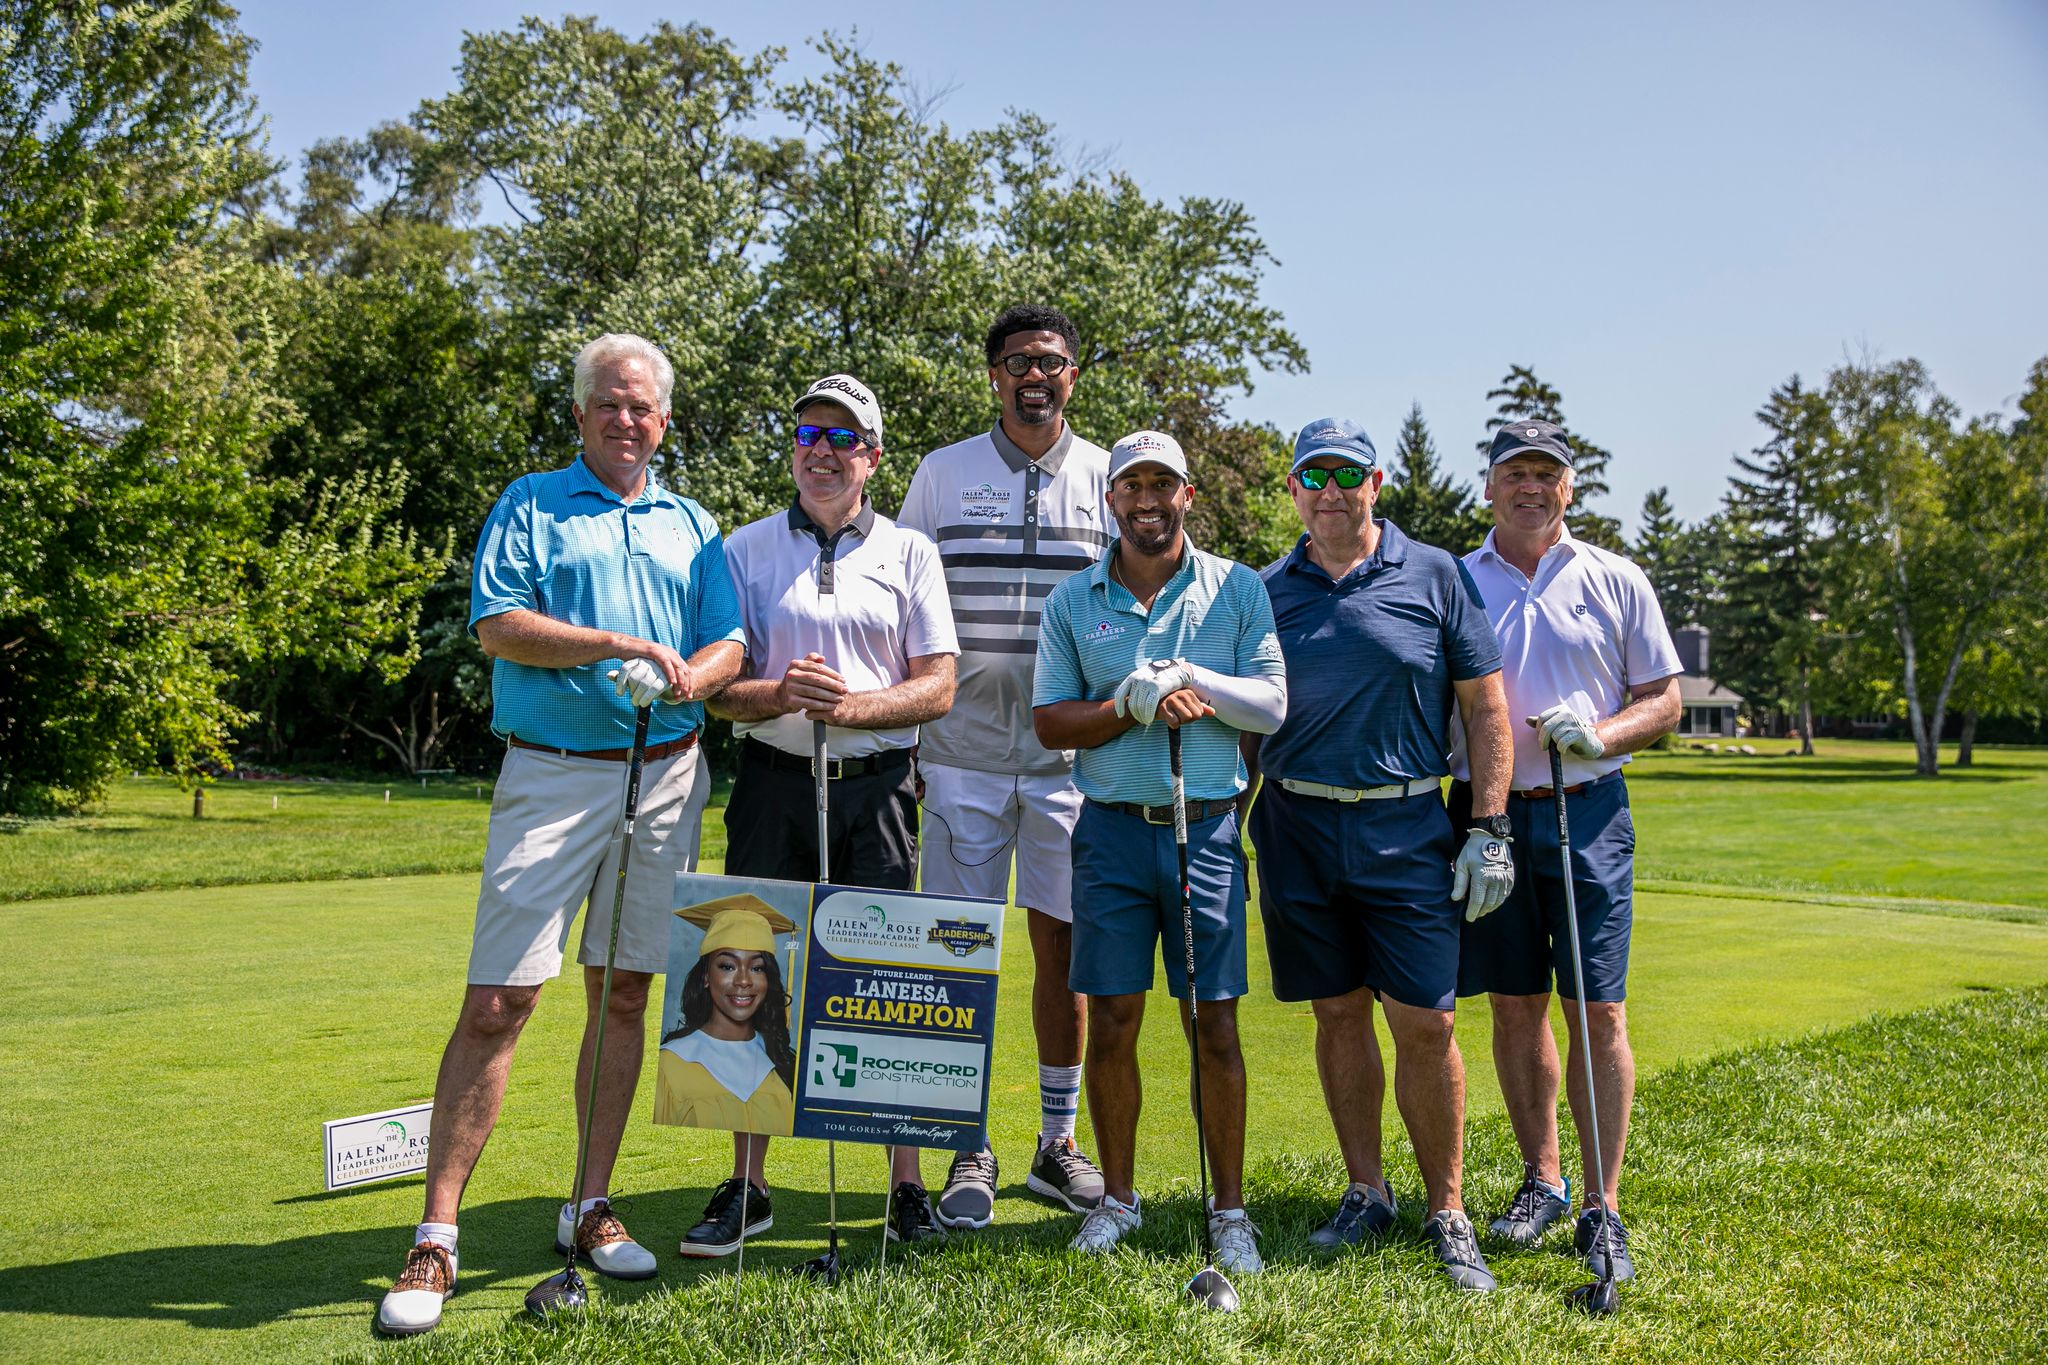 Team Platinum Equity alongside Jalen Rose and Willie Mack 3 pose with a JRLA graduate sign presented by Rockford Construction for the Jalen Rose Golf Classic, A PGD Global Production.